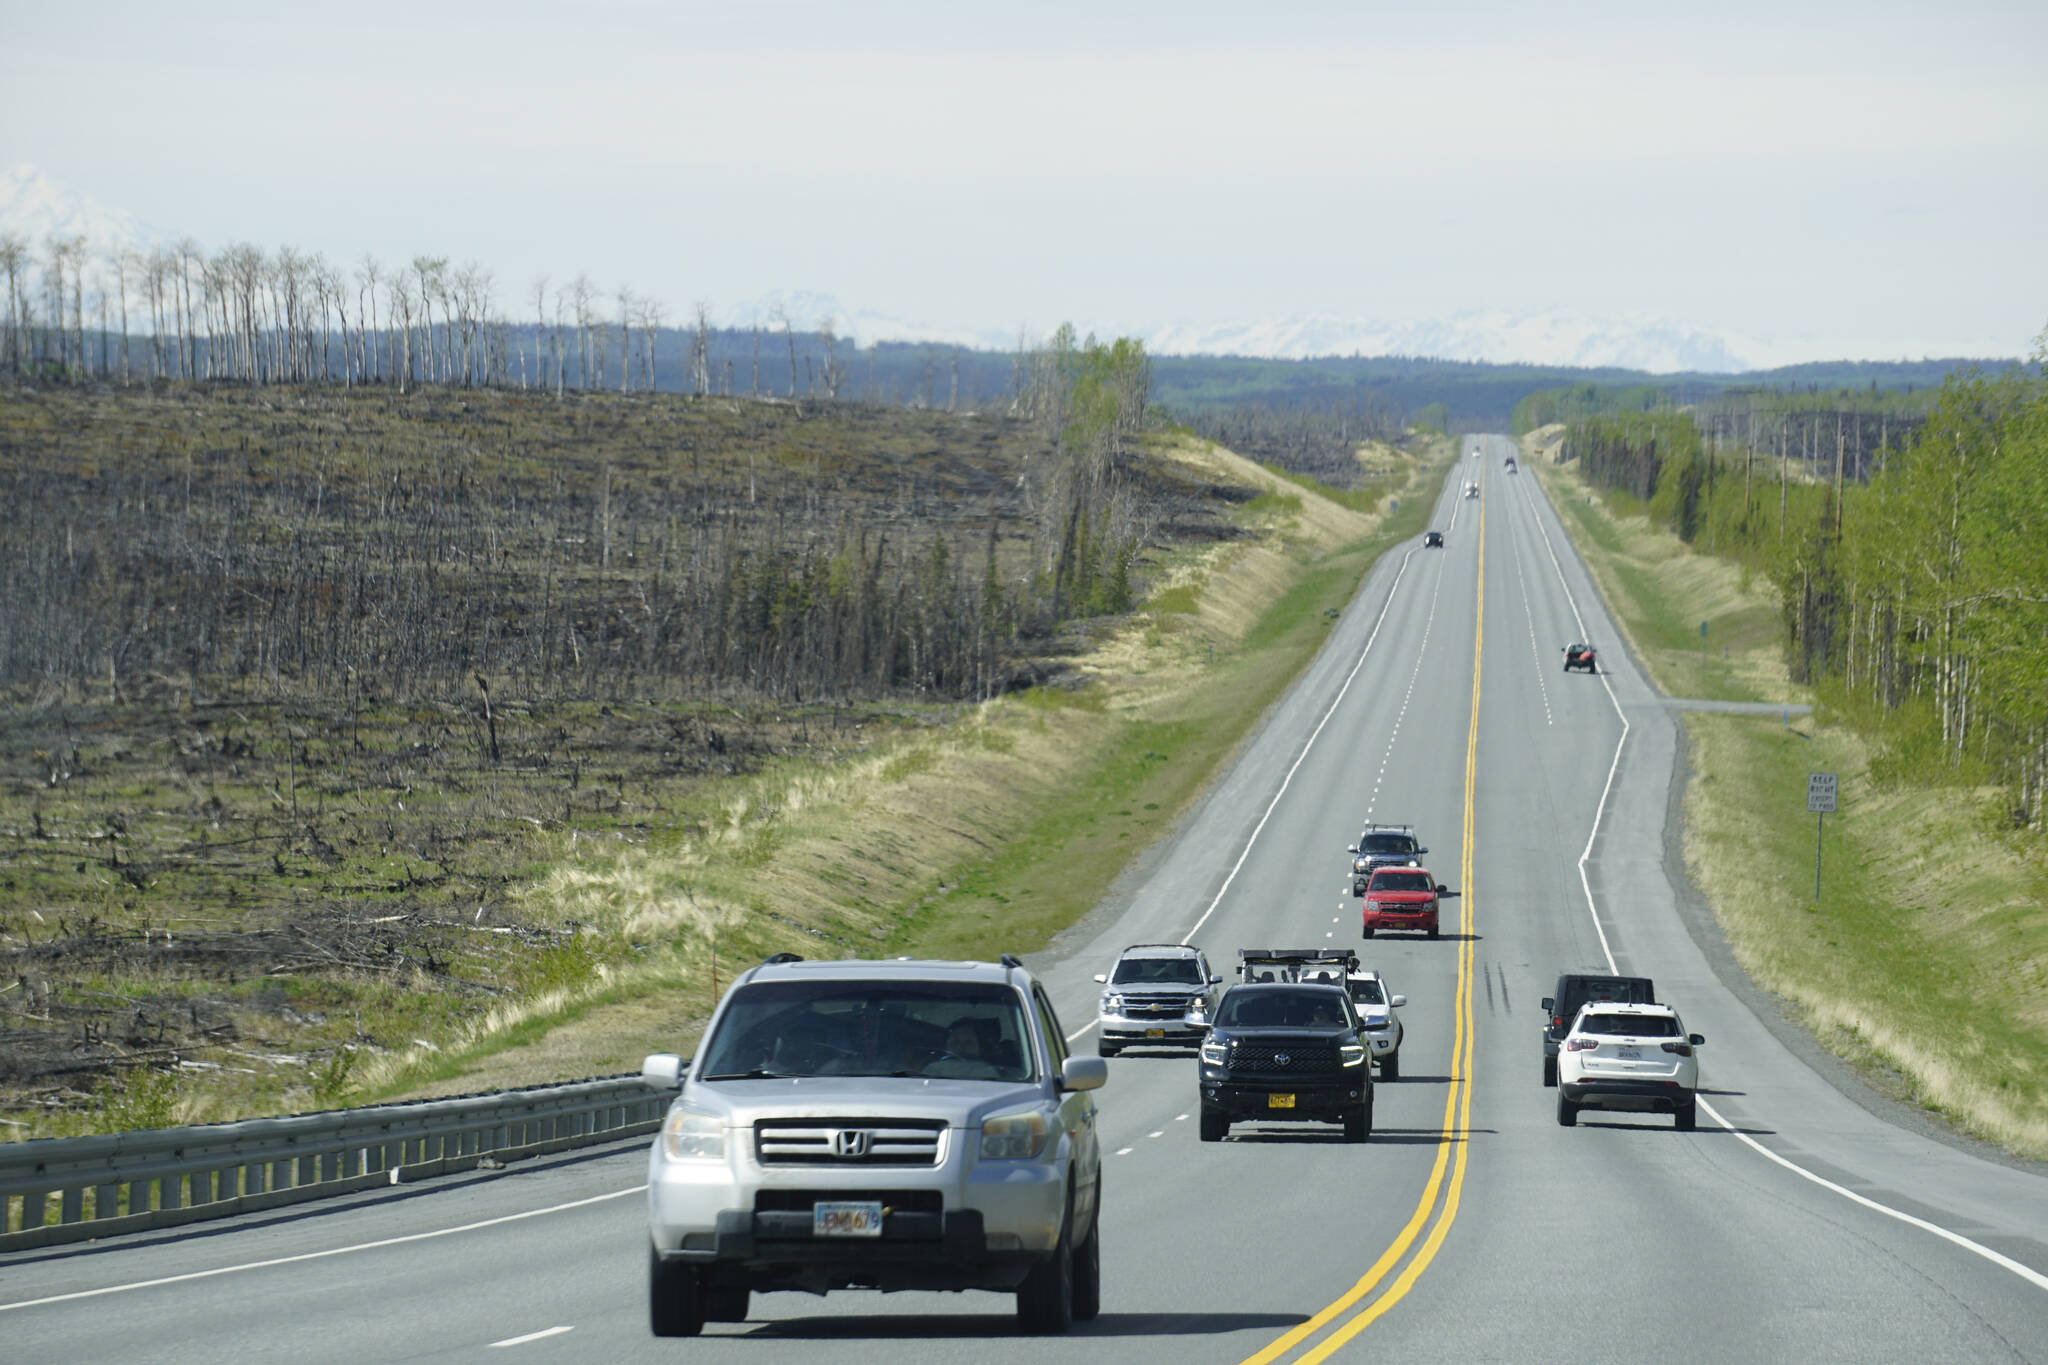 The Sterling Highway cuts through the the Swan Lake fire burn area in the Kenai National Wildlife Refuge, as seen on Sunday, May 22, 2022. (Photo by Michael Armstrong/Homer News)